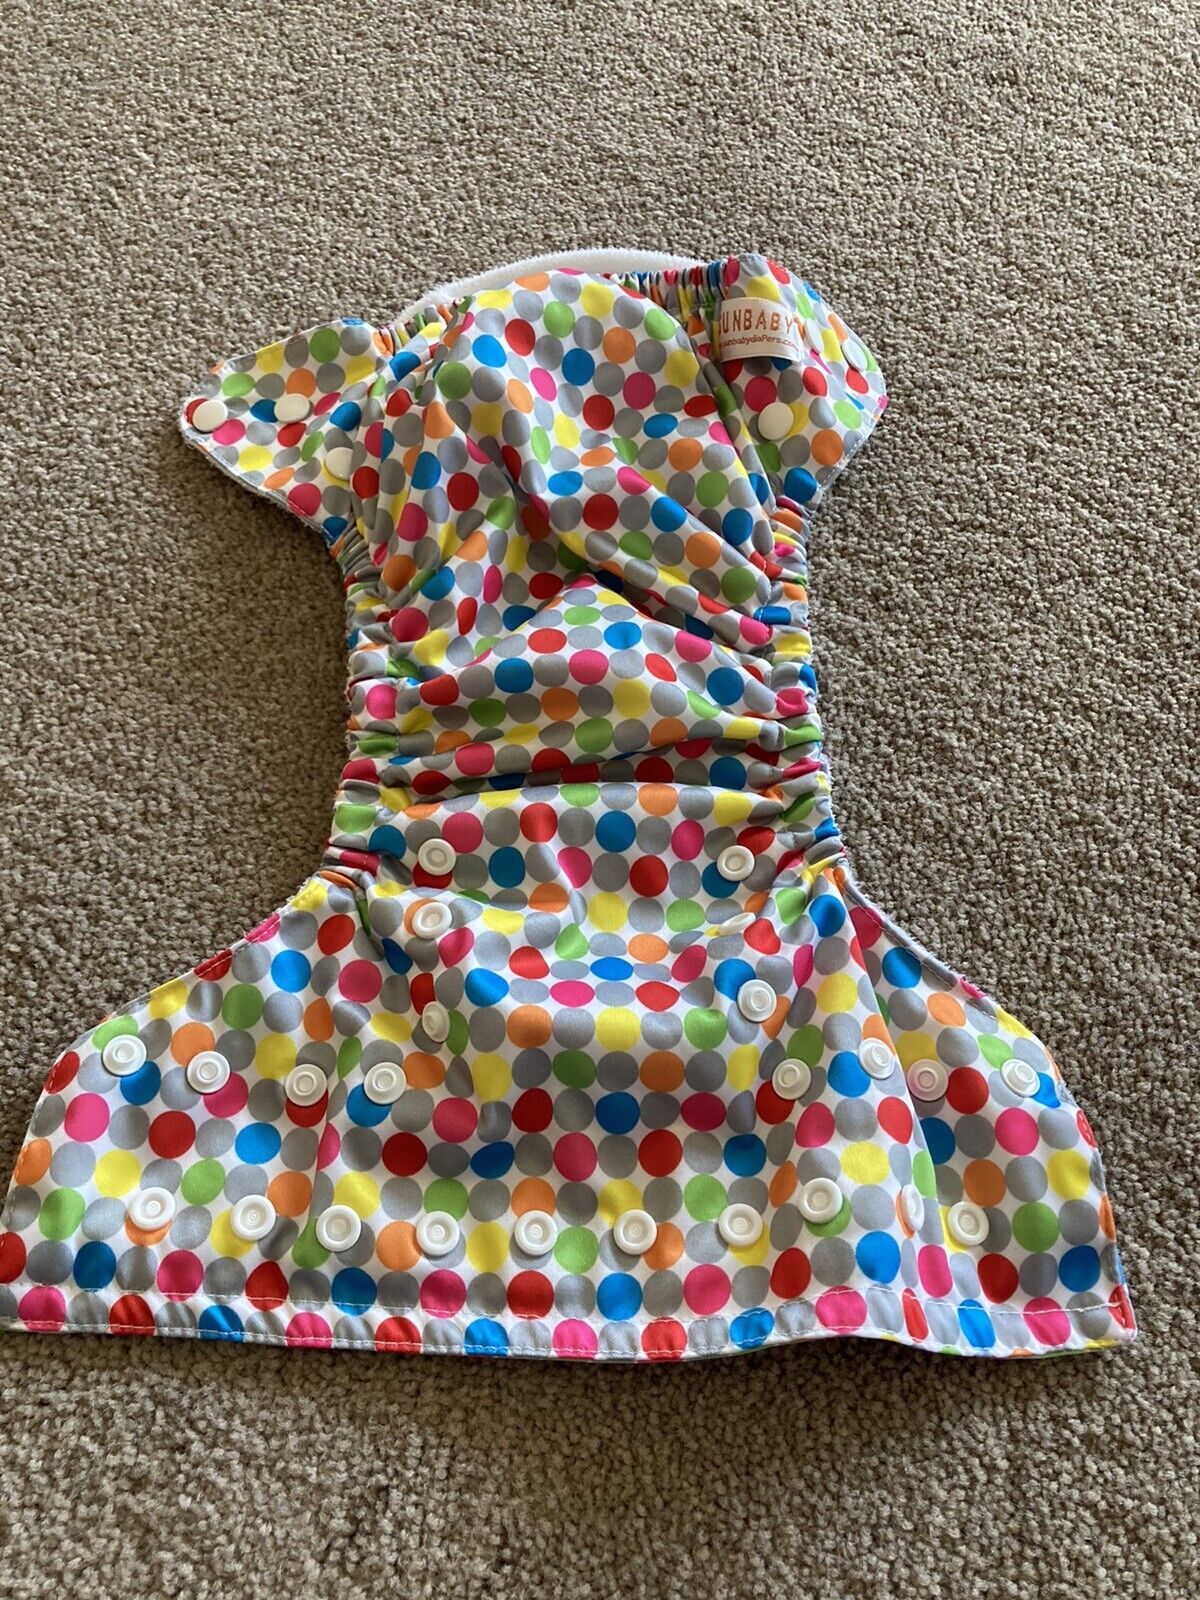 Multicolored Polkadotted Diaper Cover By Sunbaby One Size